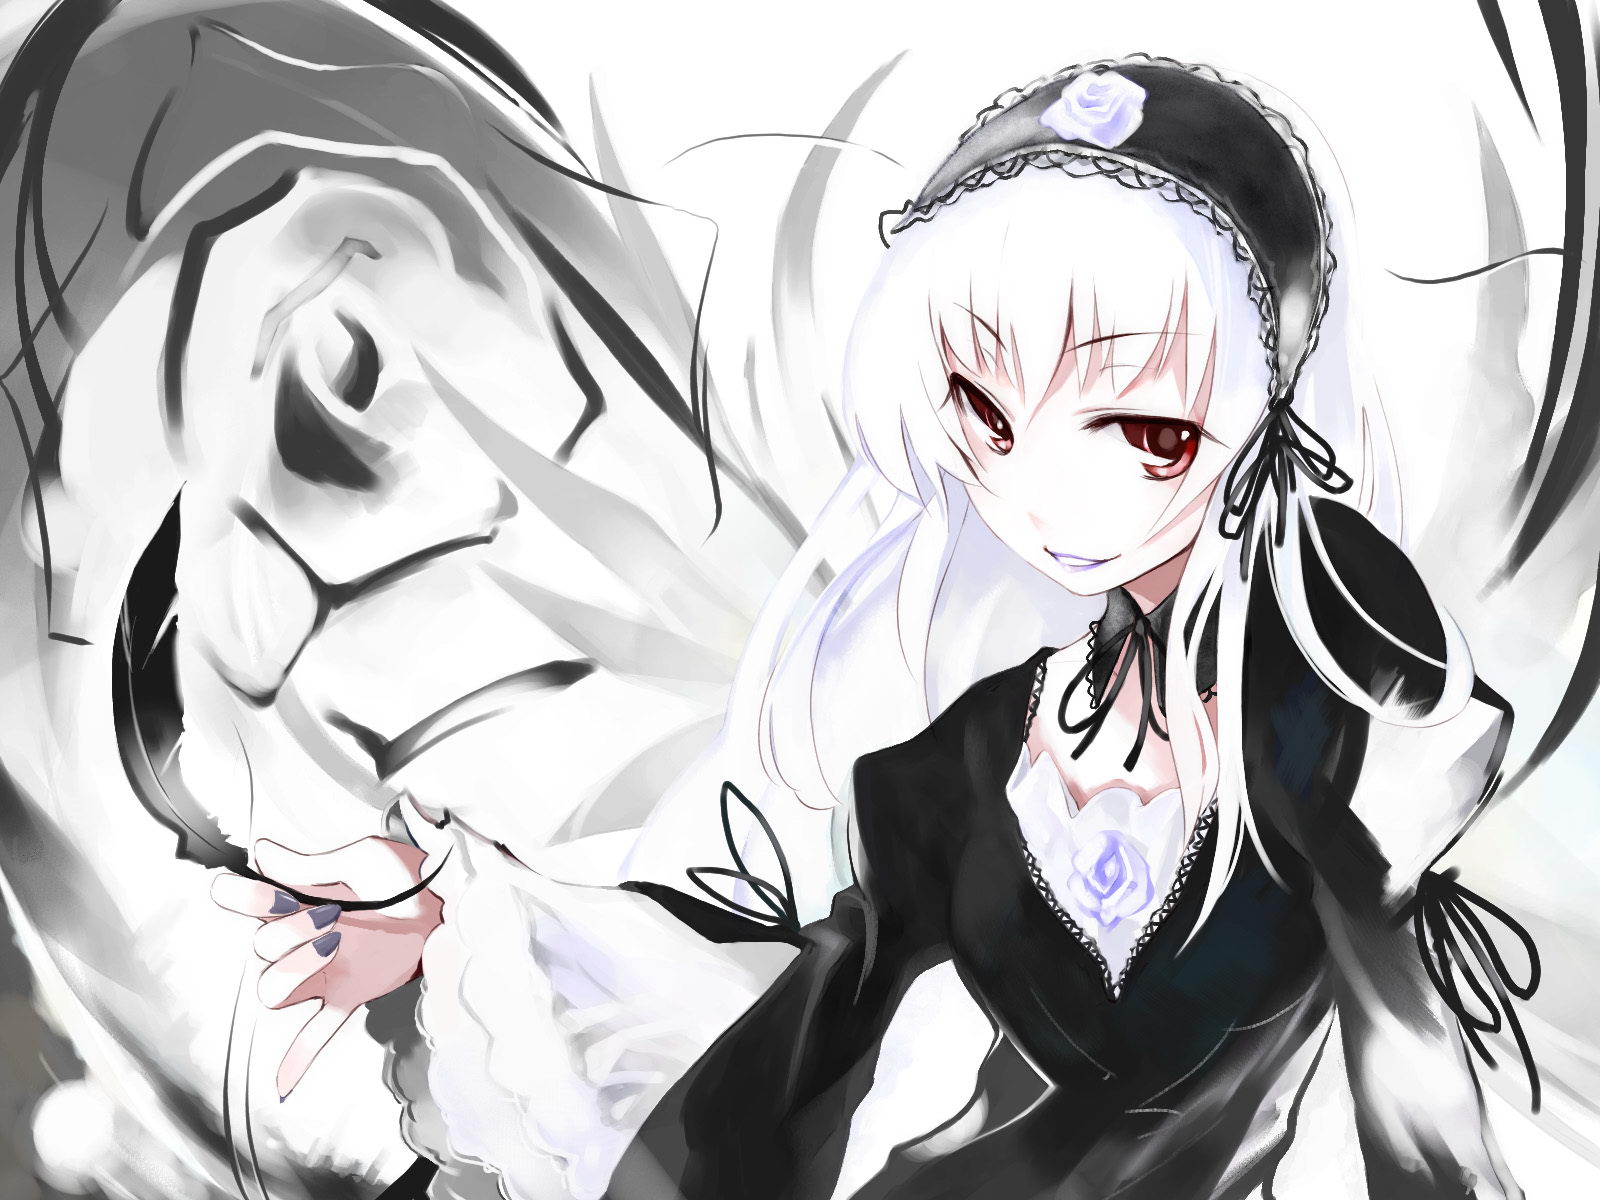 Suigintou from Rozen Maiden, elegant and mysterious.